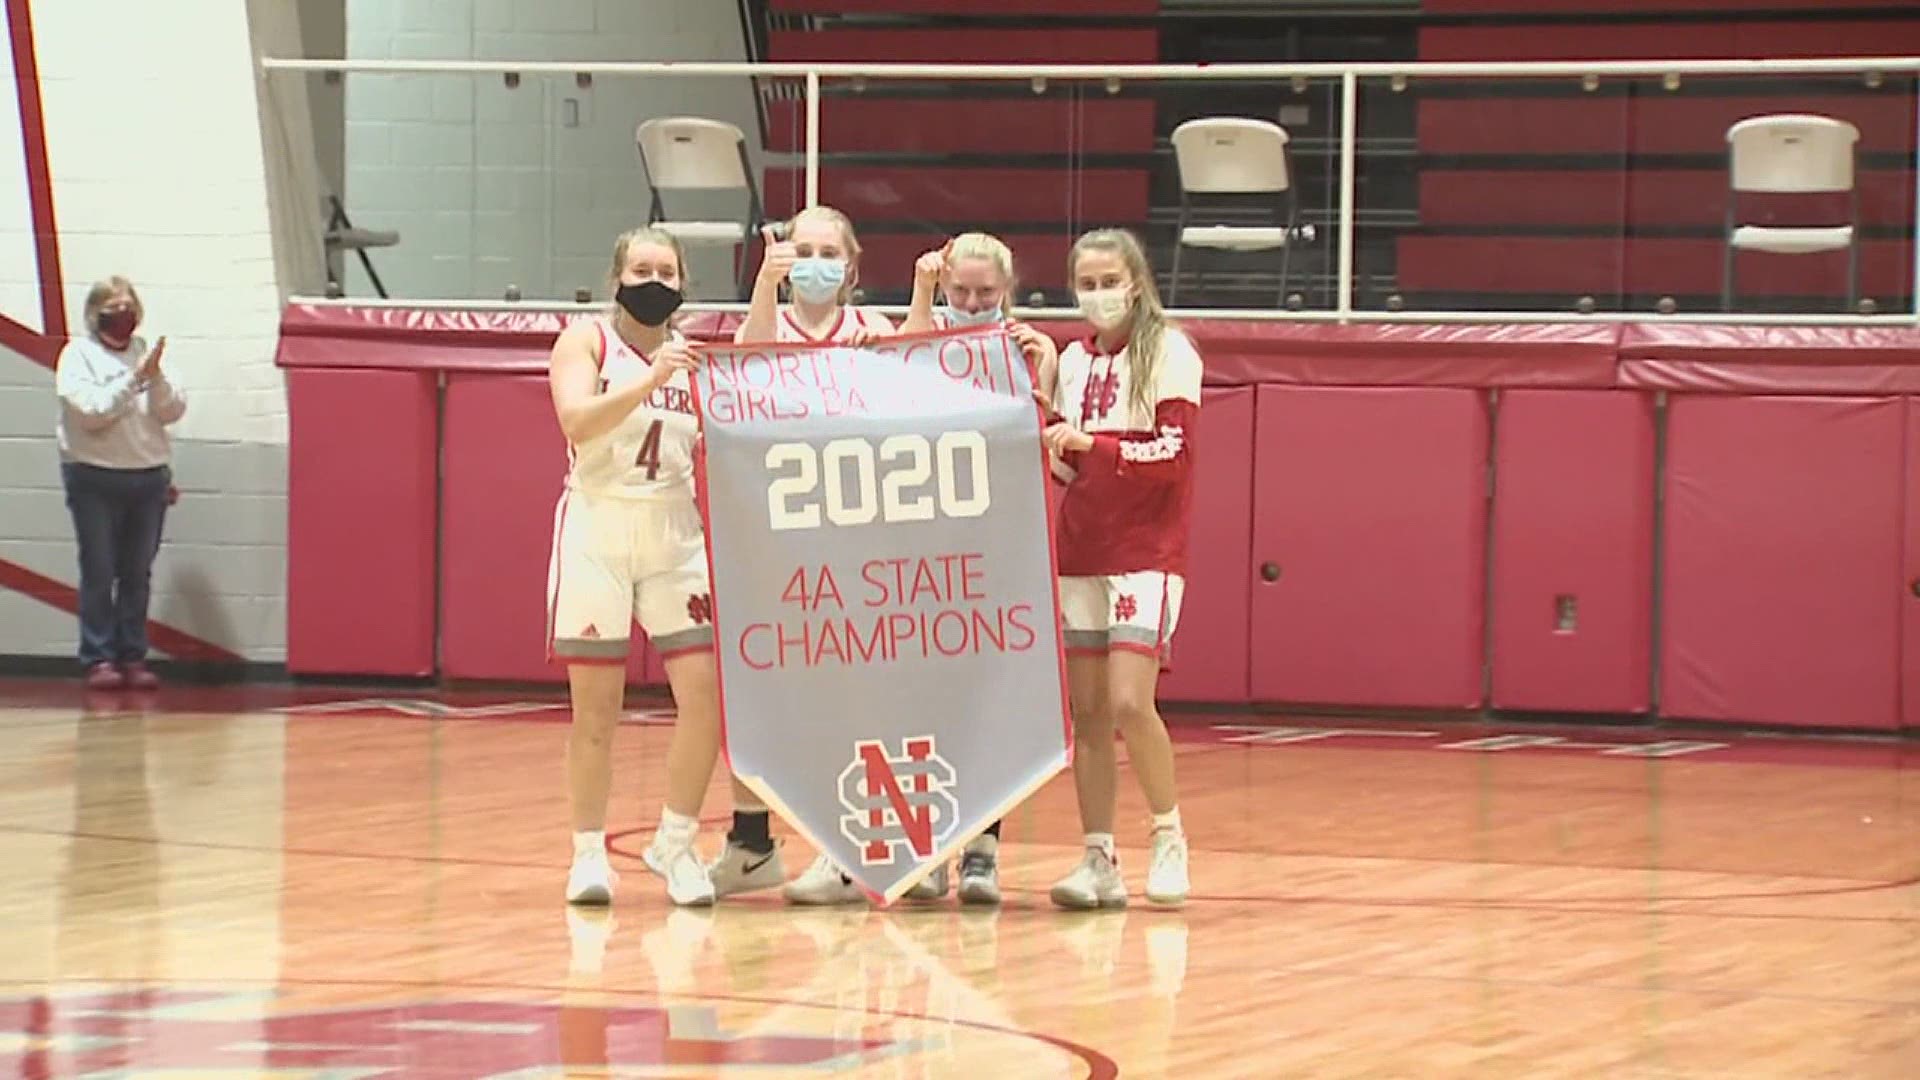 North Scott put their 2020 State Championship Banner in the rafters then opened their season with a win over Dubuque Hempstead.